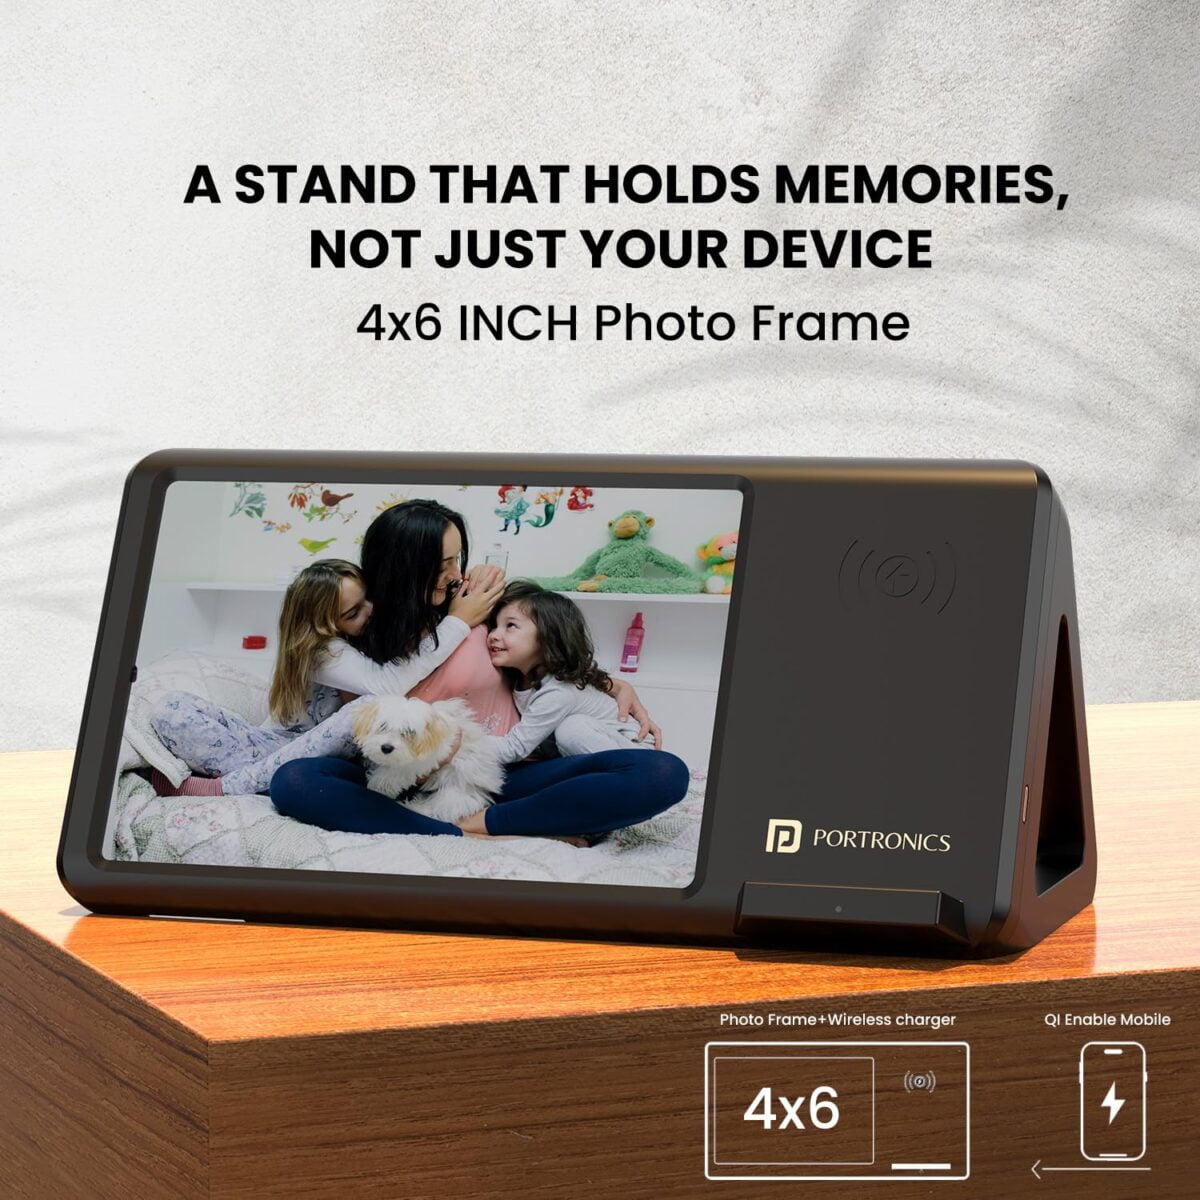 Portronics freedom 5 qi enable charger with photo frame 7 portronics freedom 5 qi enable charger with photo frame